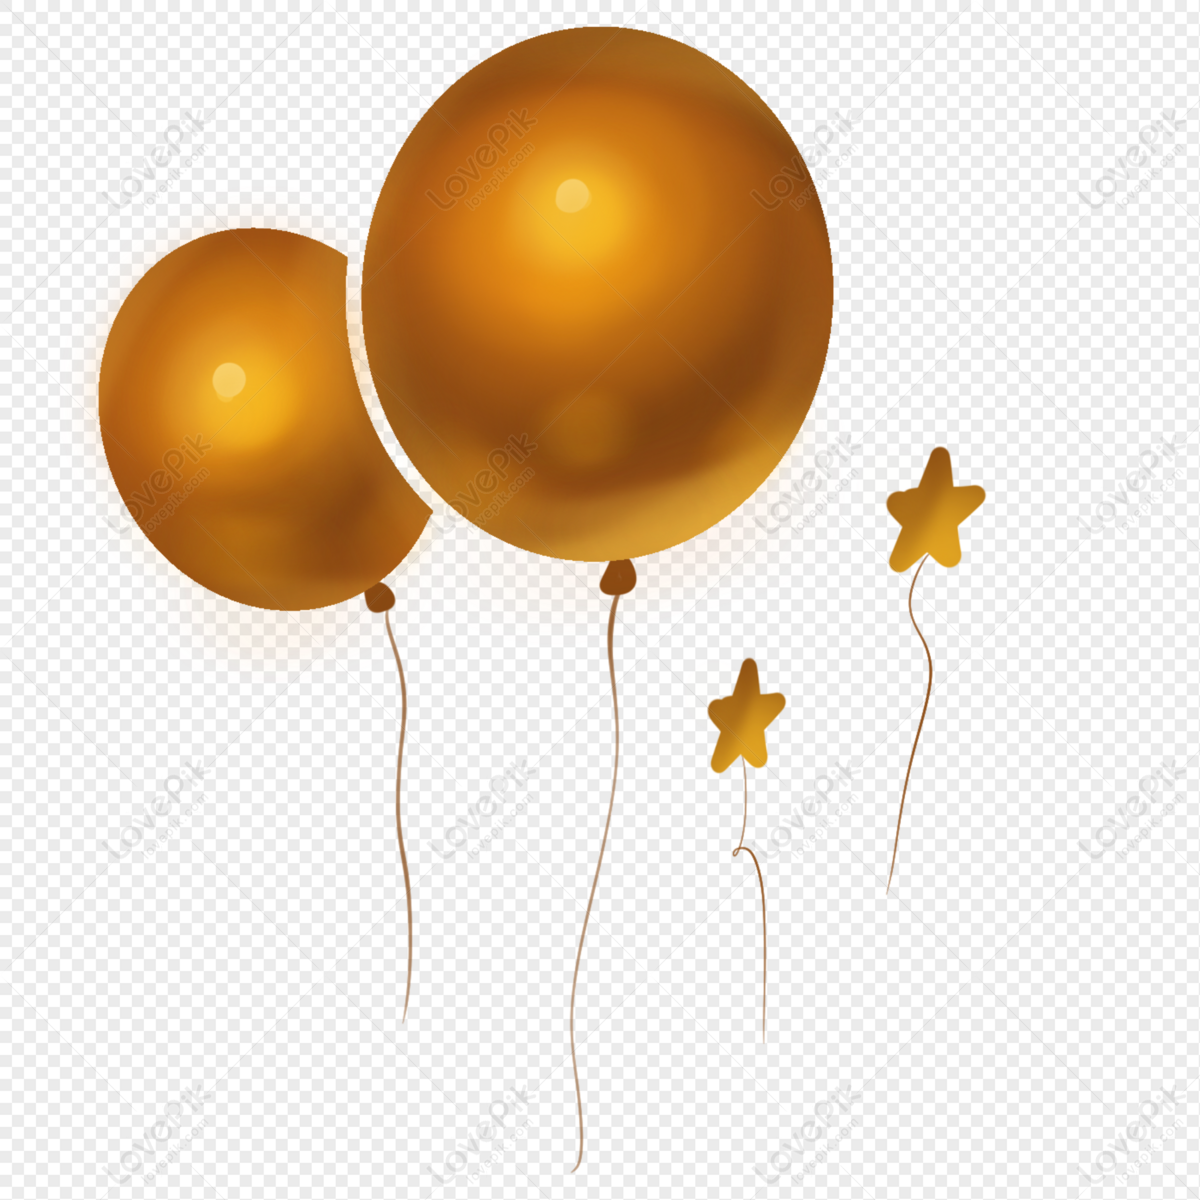 Opening must-have golden balloon, balloon, golden ballon, hand painting png hd transparent image